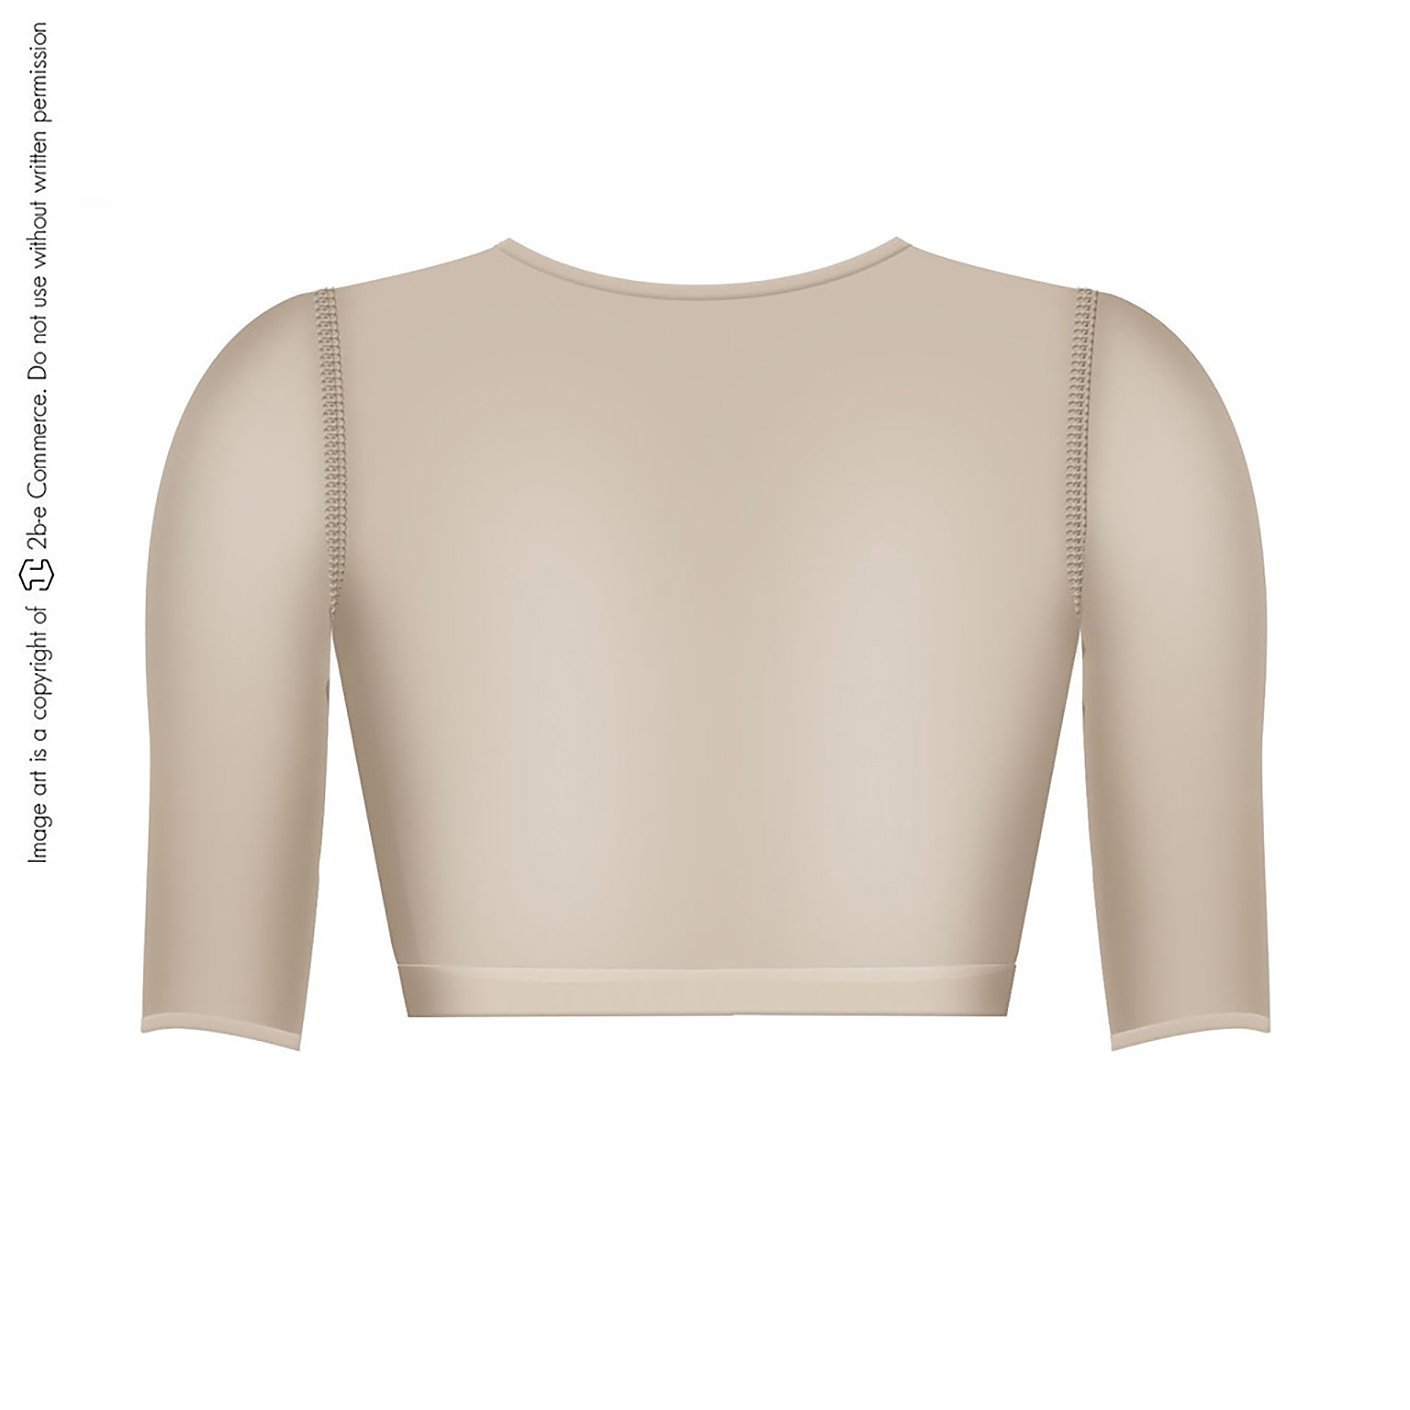 FAJAS SALOME 328 Surgical Breast Augmentation Bra with Sleeves - New England Supplier